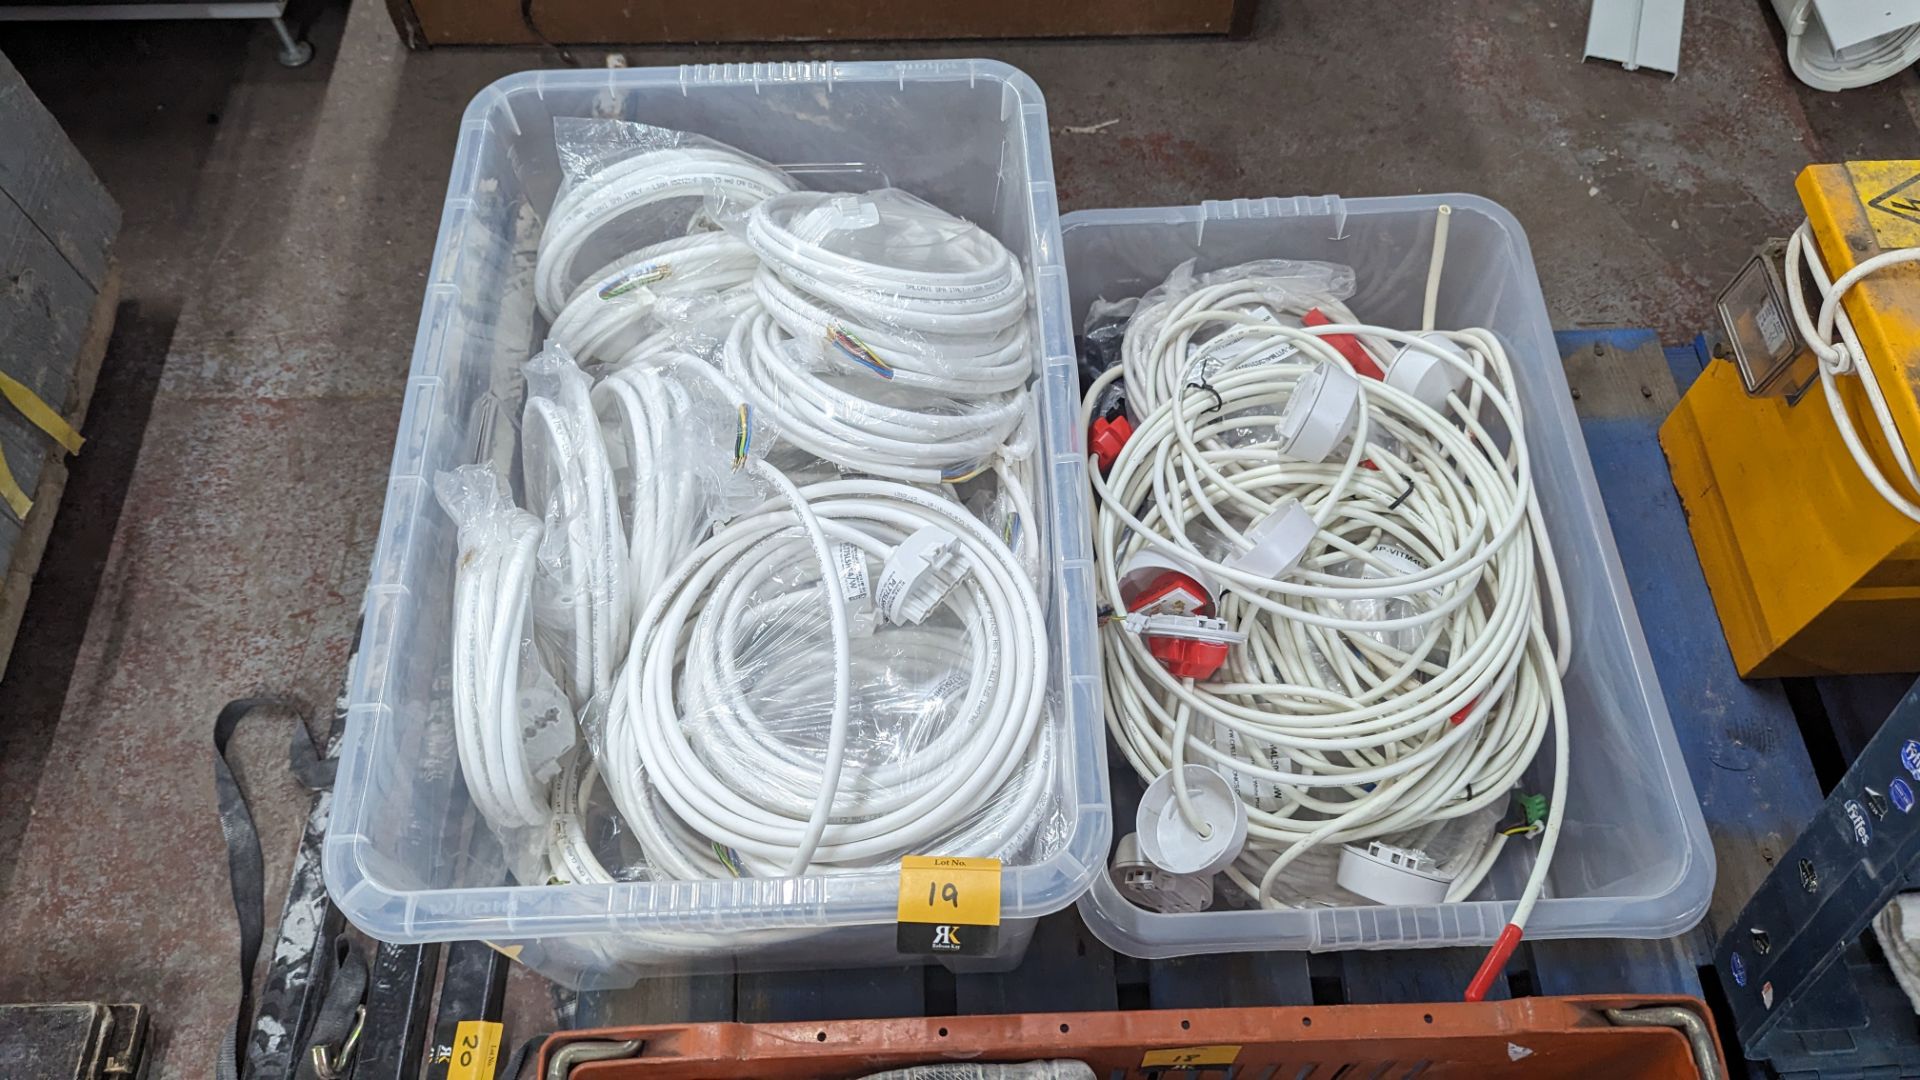 The contents of 2 tubs of electrical cable - tubs excluded